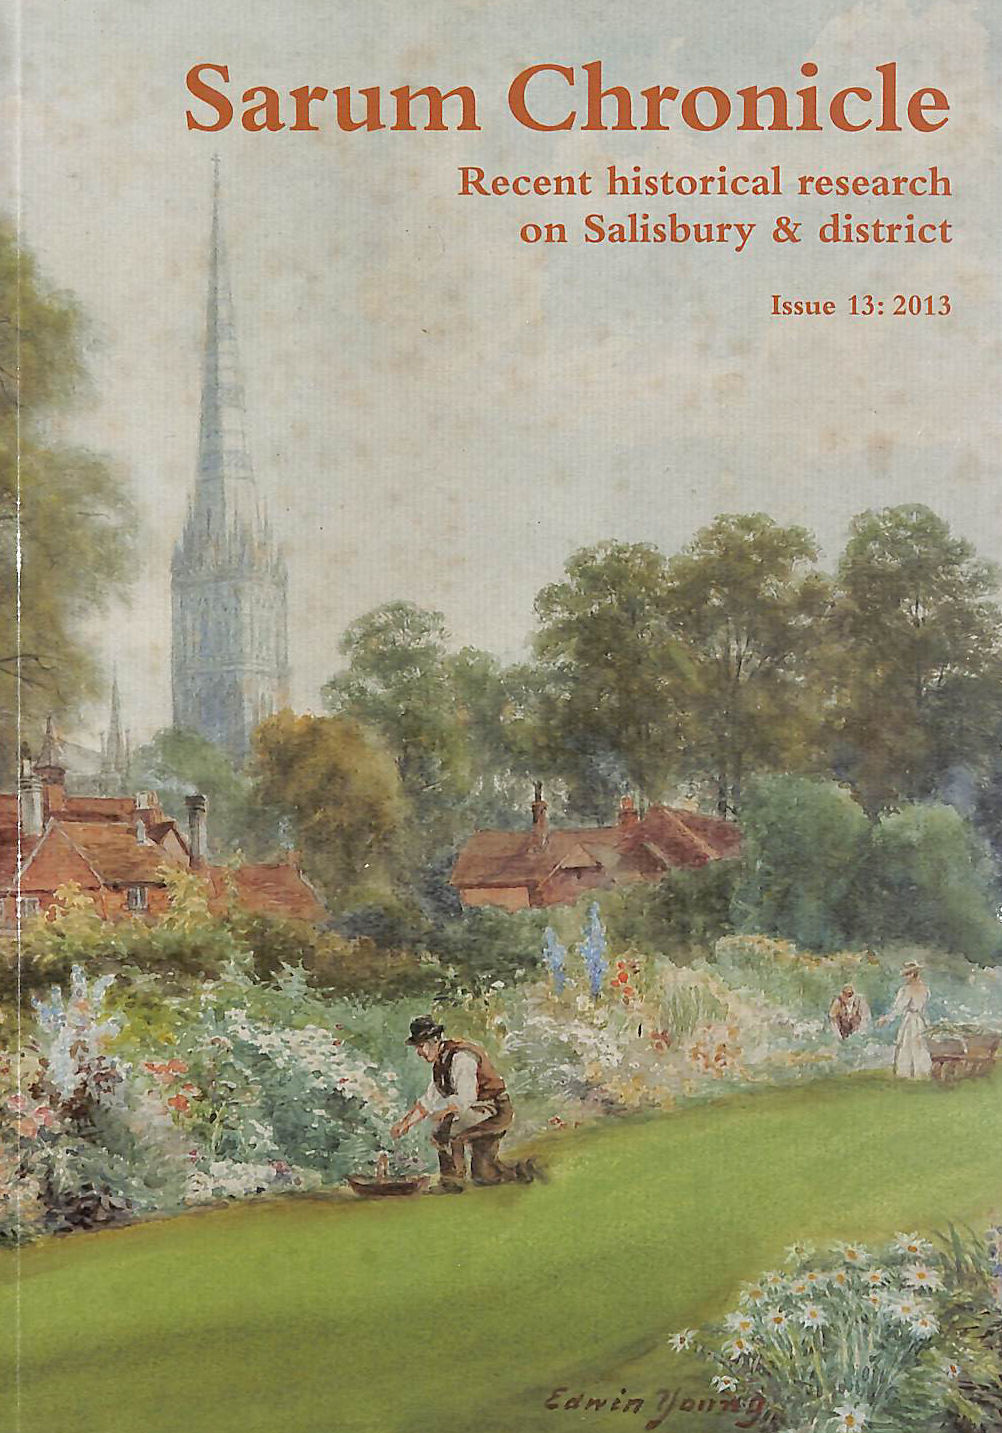 SARUM CHRONICLE - Sarum Chronicle 2013: Recent Historical Research on Salisbury & District